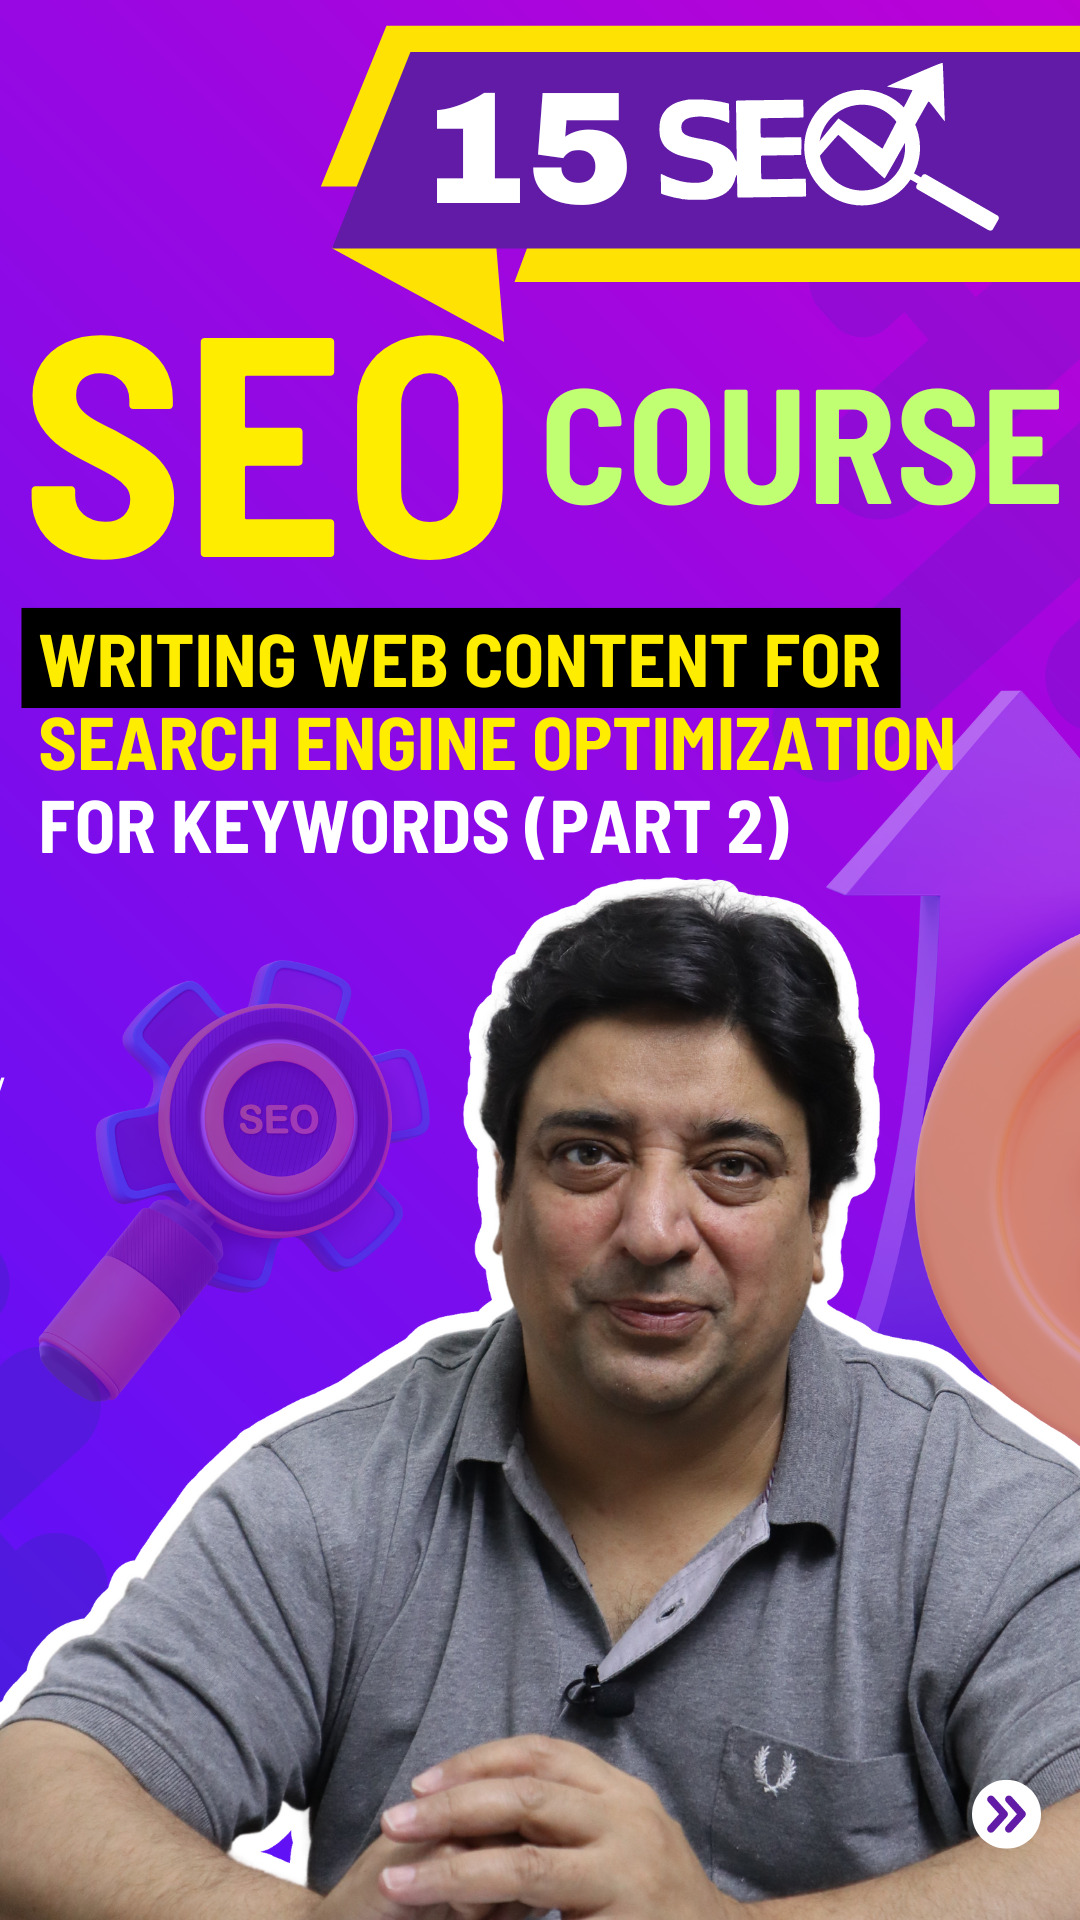 Writing web content for search engine optimization for keywords